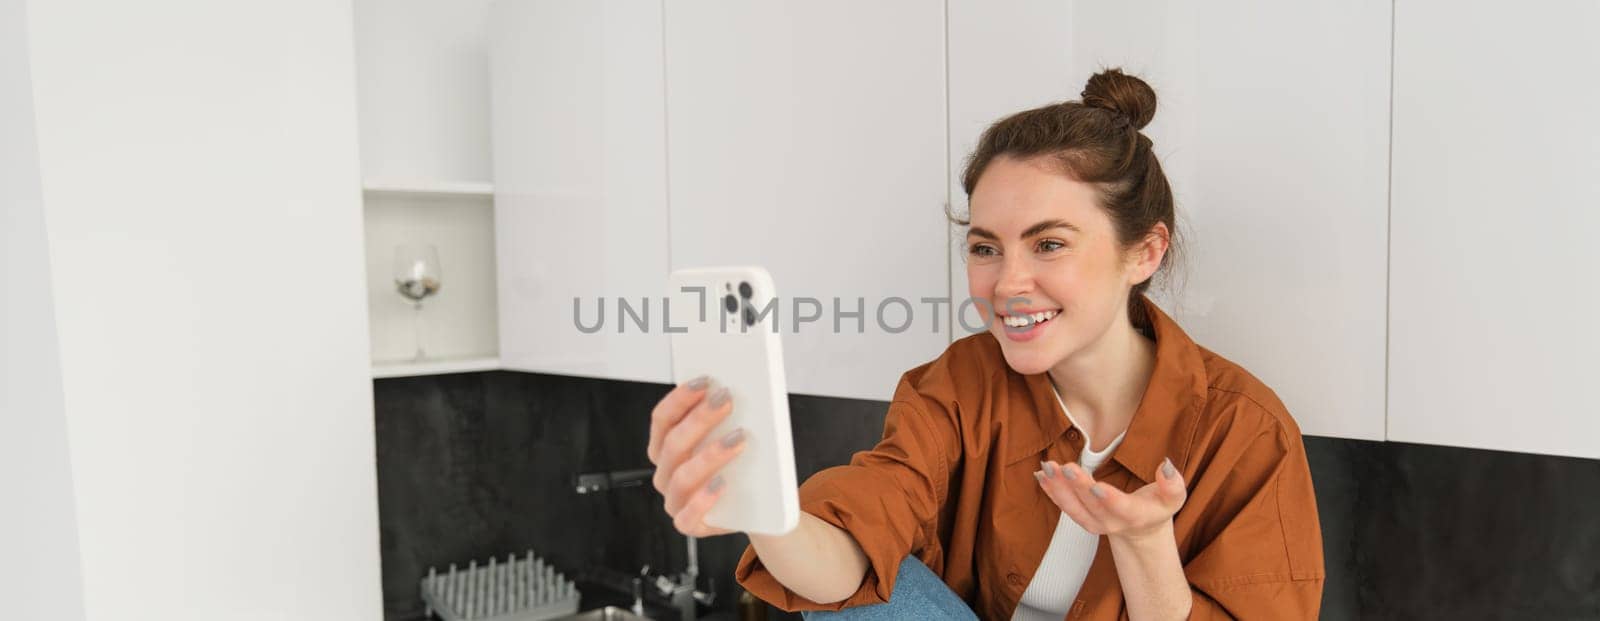 Portrait of young cheerful woman laughing and smiling during phone call, video chats with friend, sits on kitchen counter and talks to someone using smartphone app.